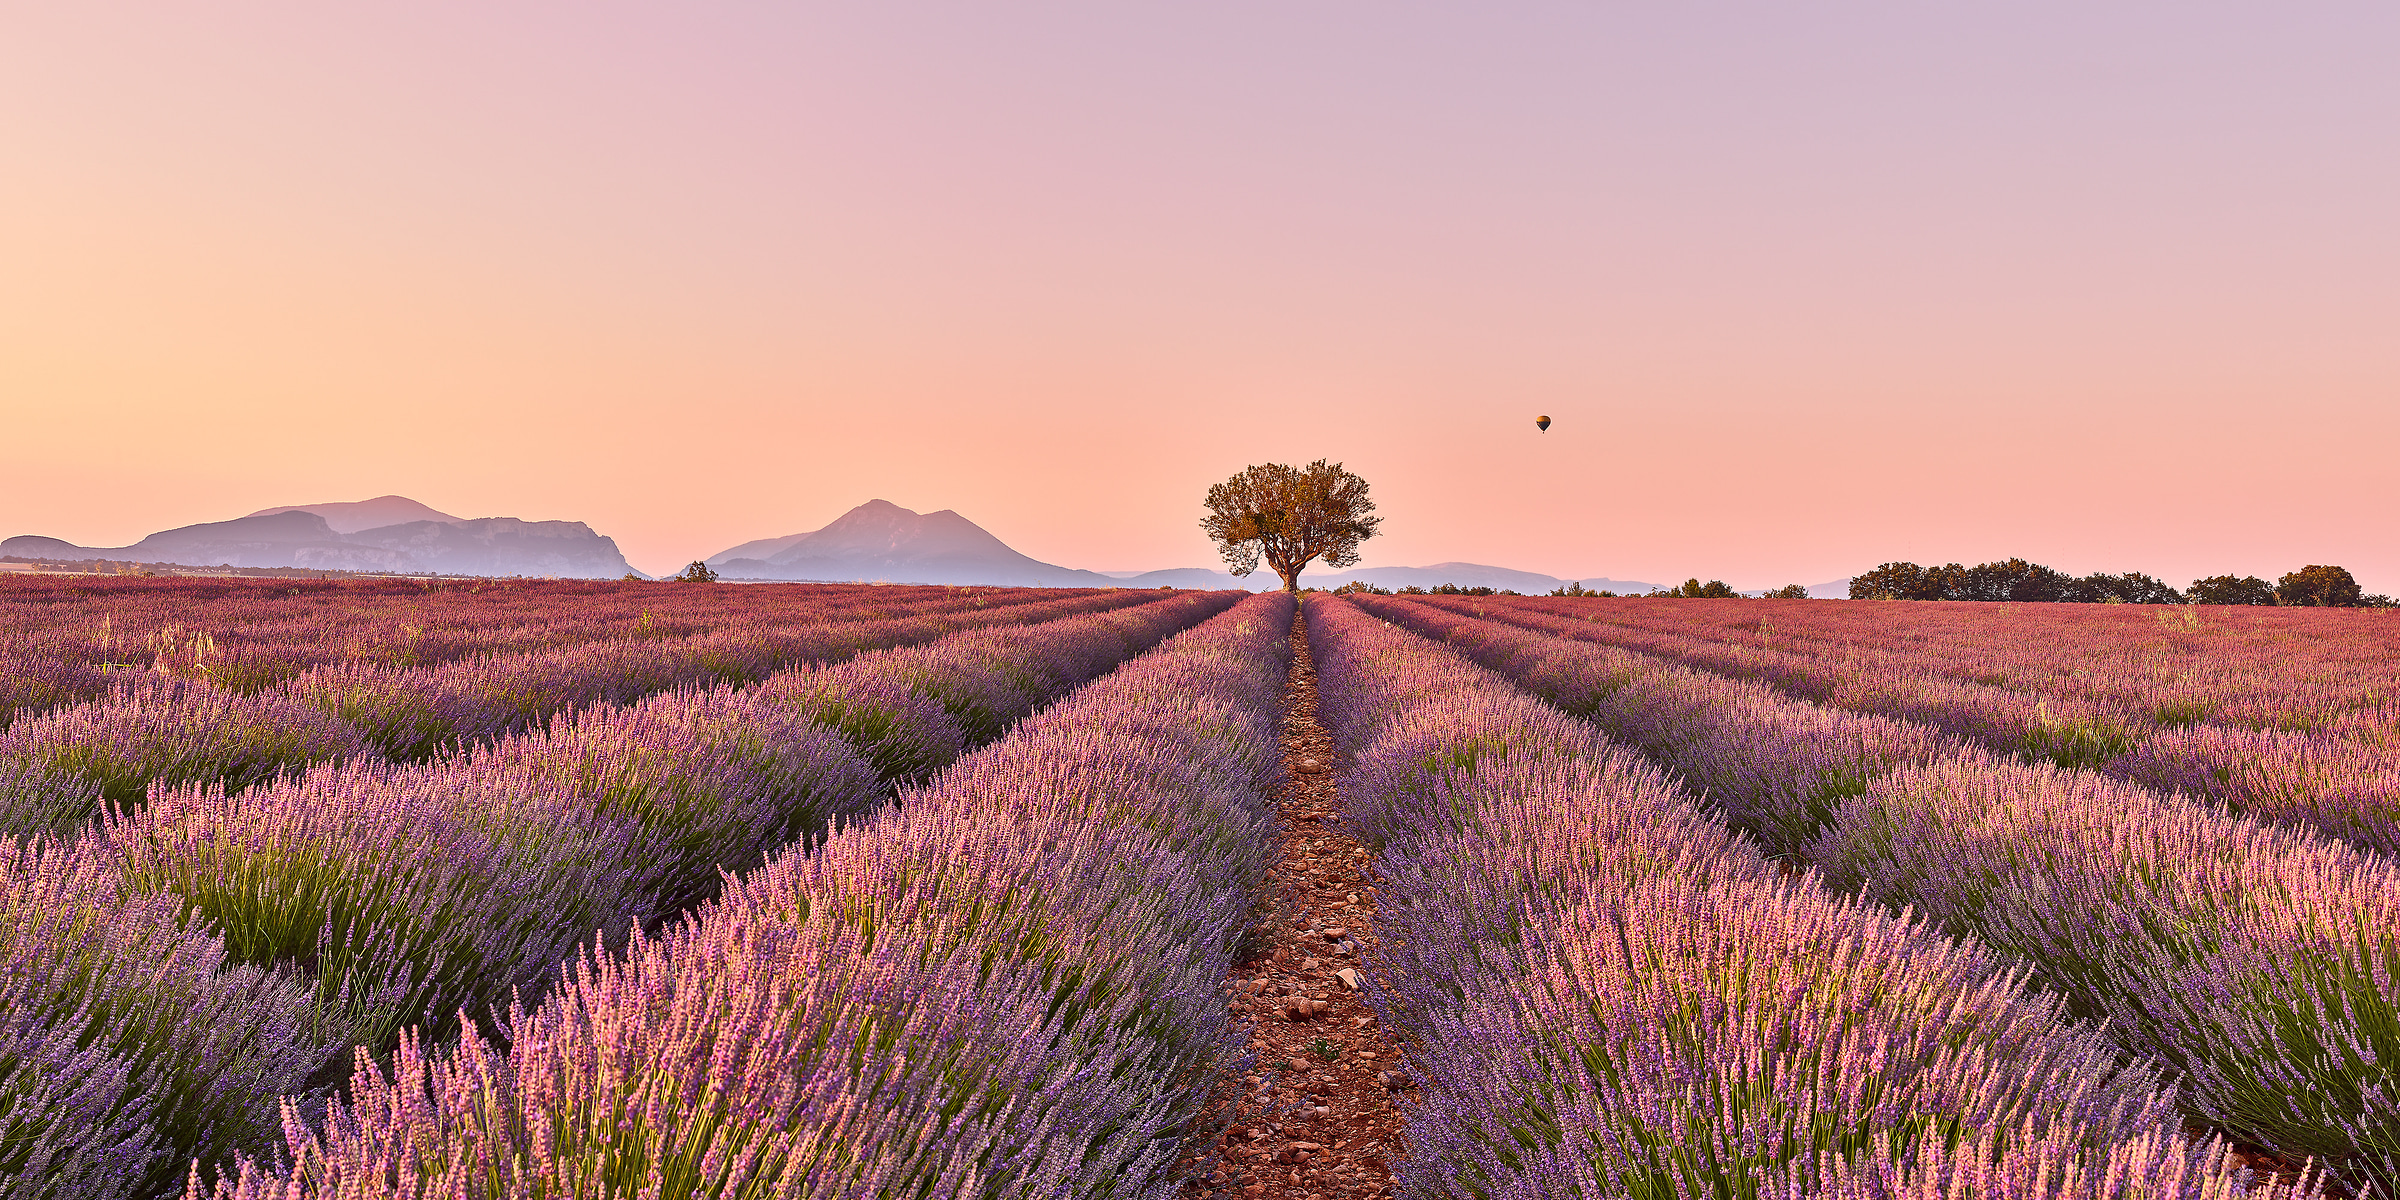 139 megapixels! A very high resolution, large-format VAST photo print of a lavender field in France; nature landscape photograph created by David Meaux in Valensole Plateau, Valensole, Provence-Alpes-Côte d'Azur, France.